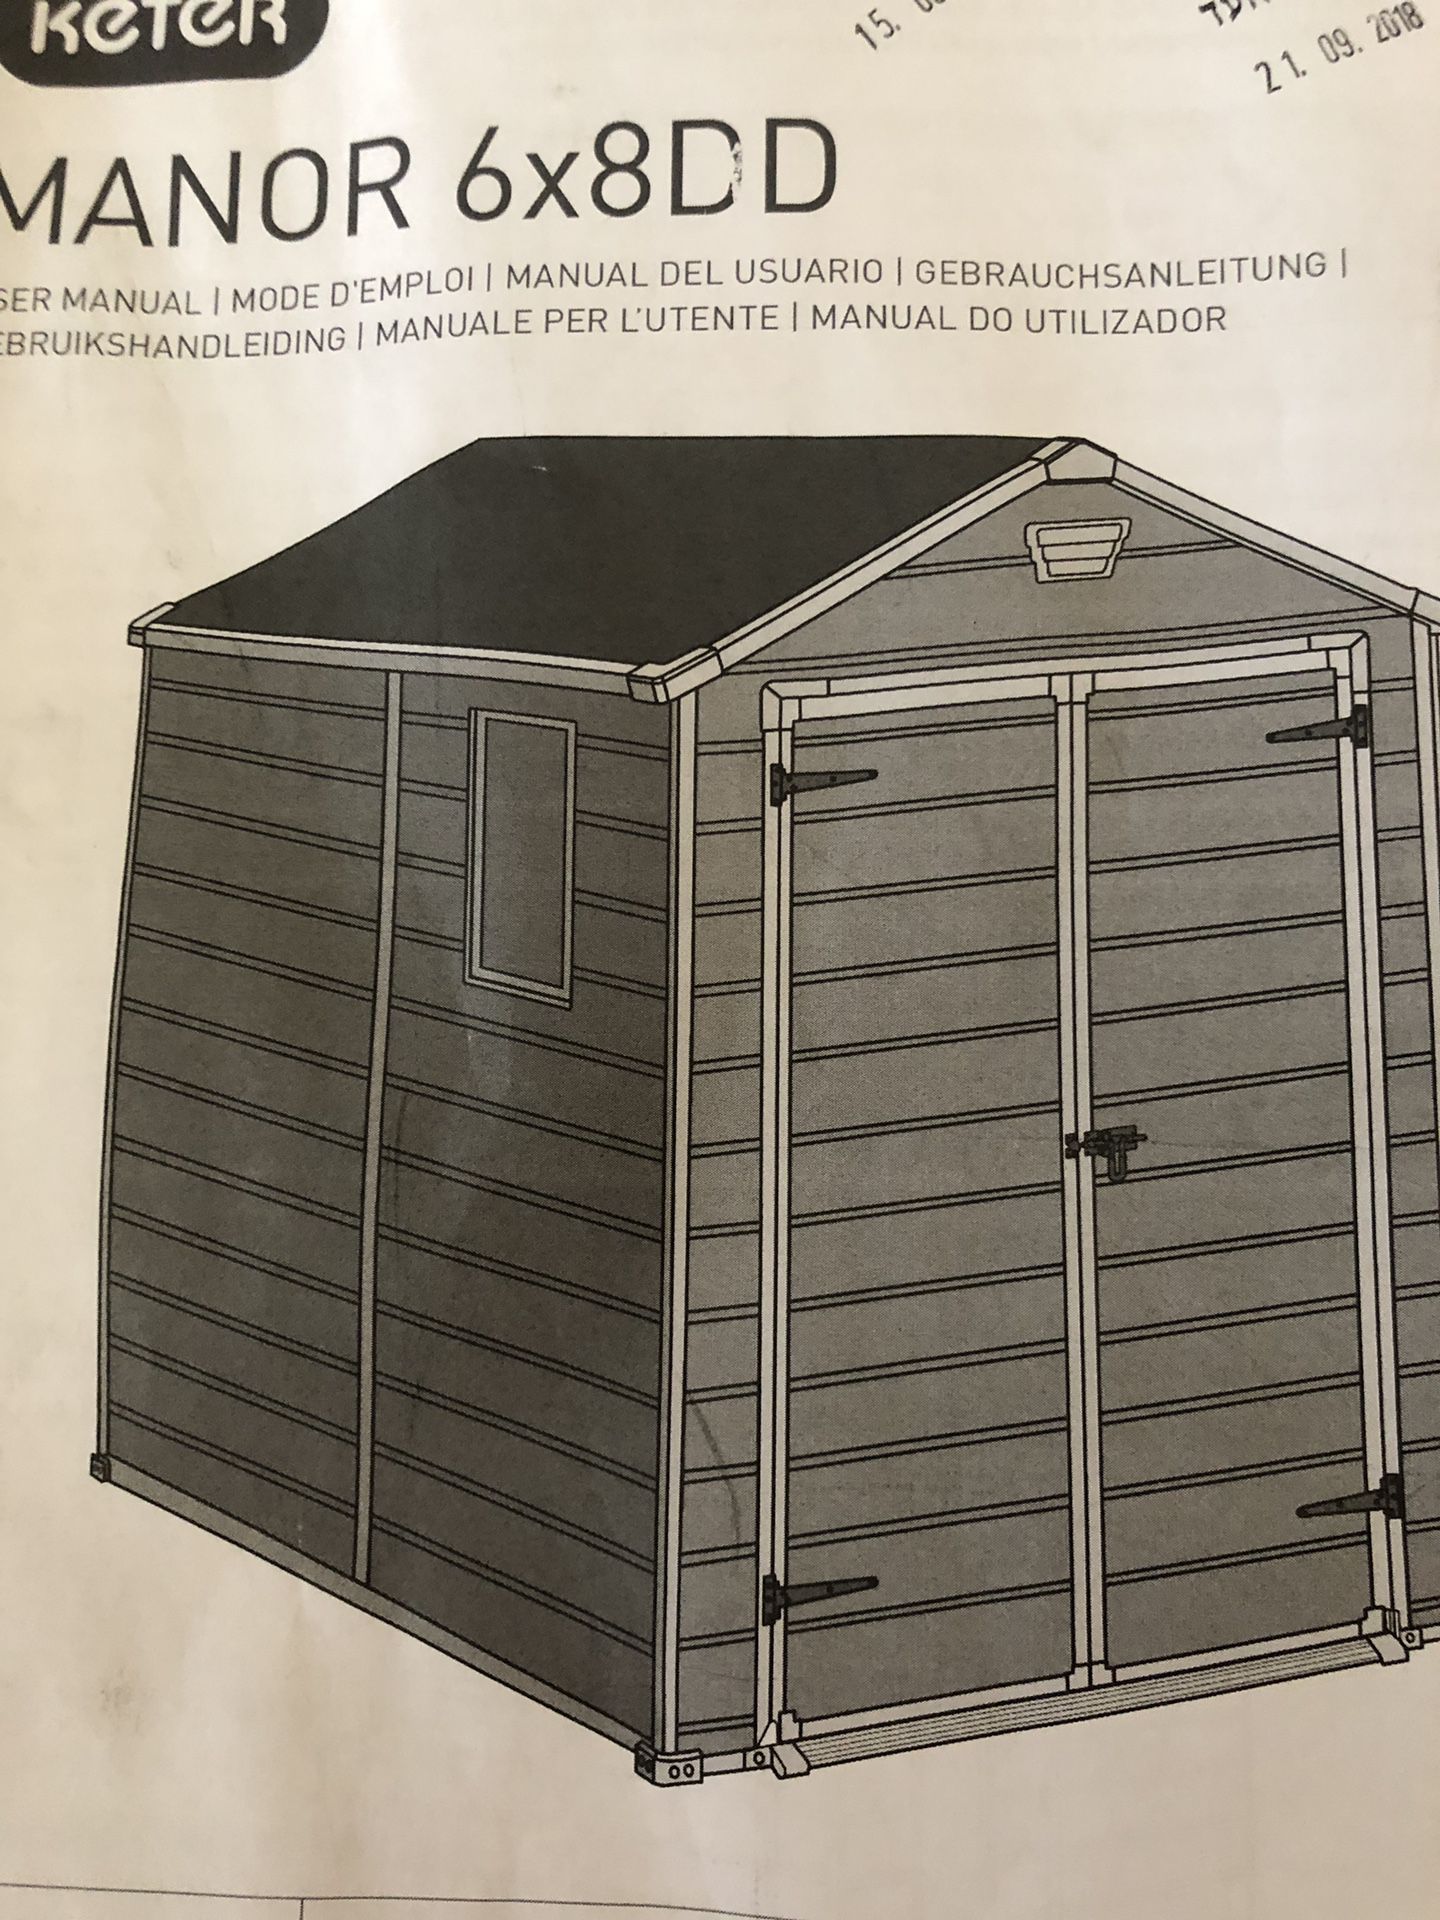 Meter manor 6x8 DD shed